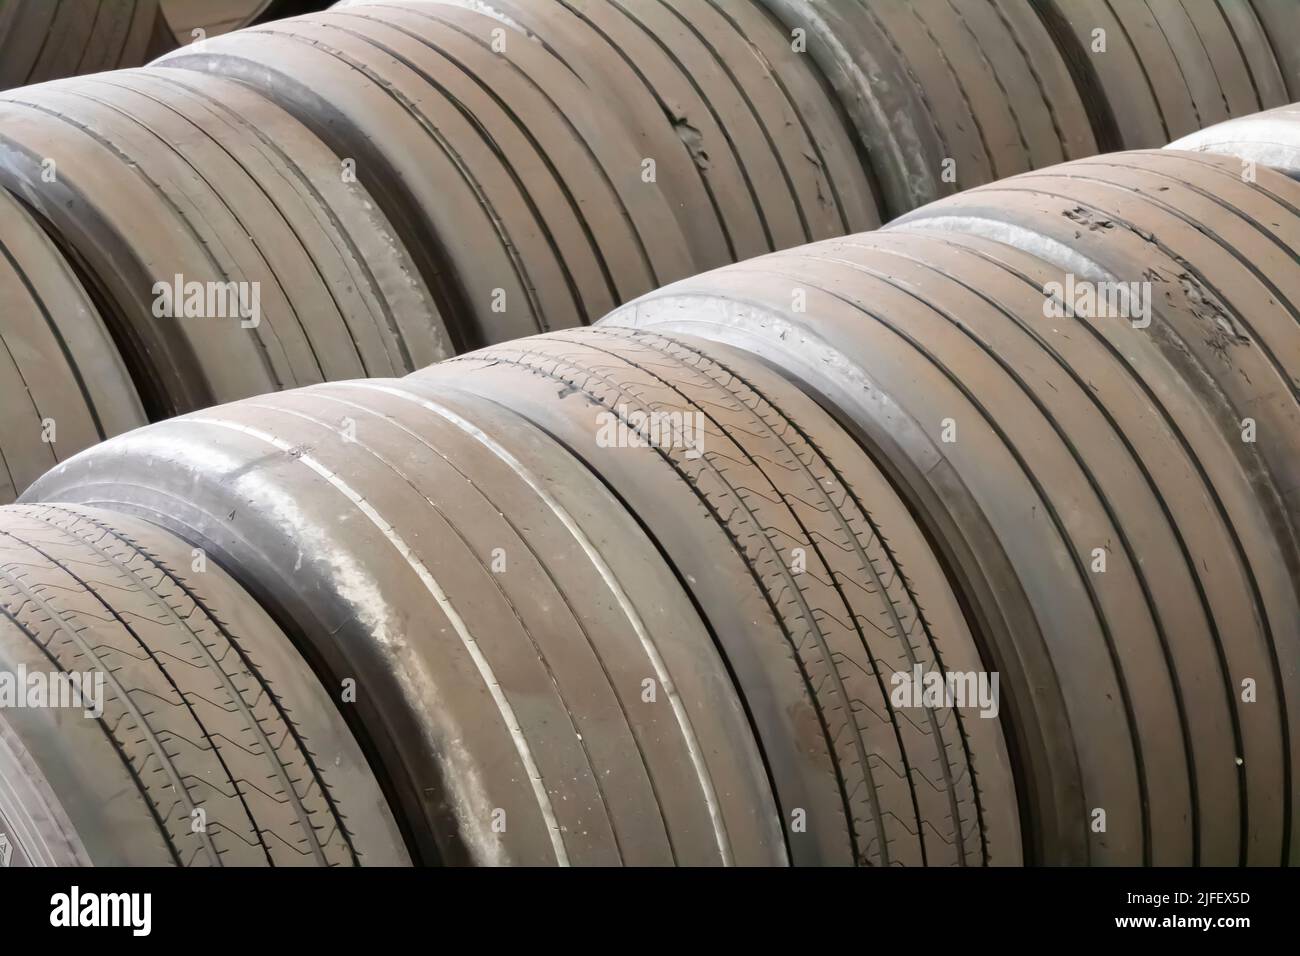 Used tires to be recycled in a workshop Stock Photo